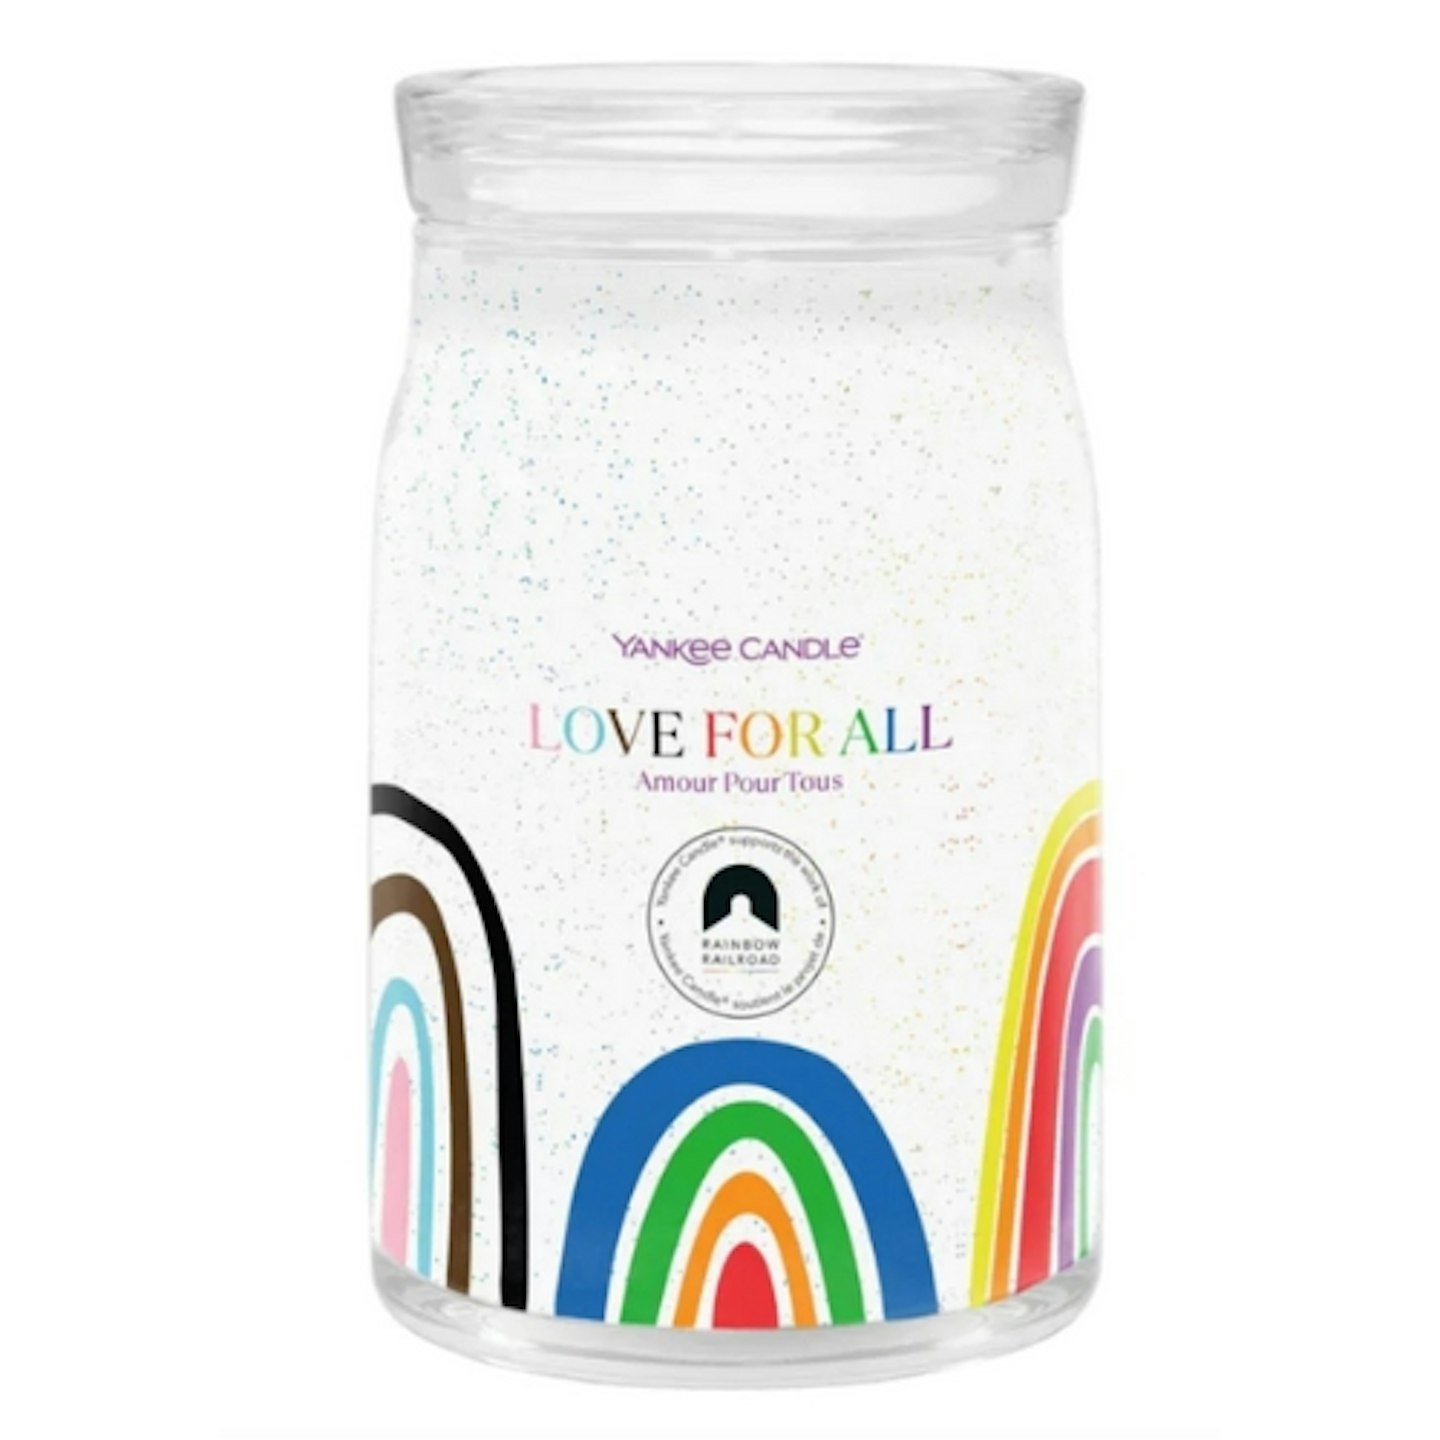 Yankee Candle Love For All Signature Large Jar Candle